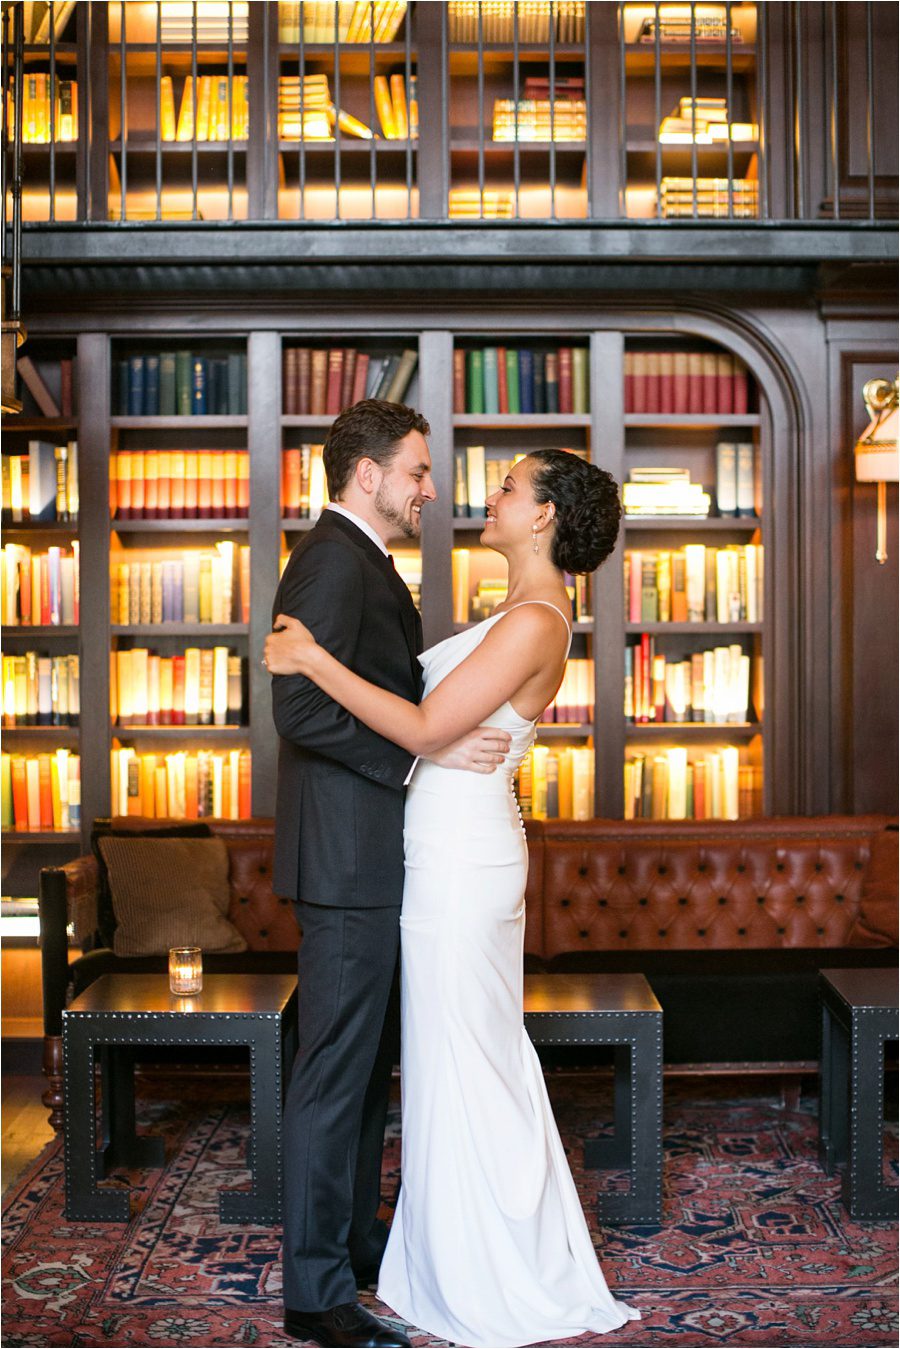 Midtown Loft and Terrace Wedding Photos - Amy Rizzuto Photography-19